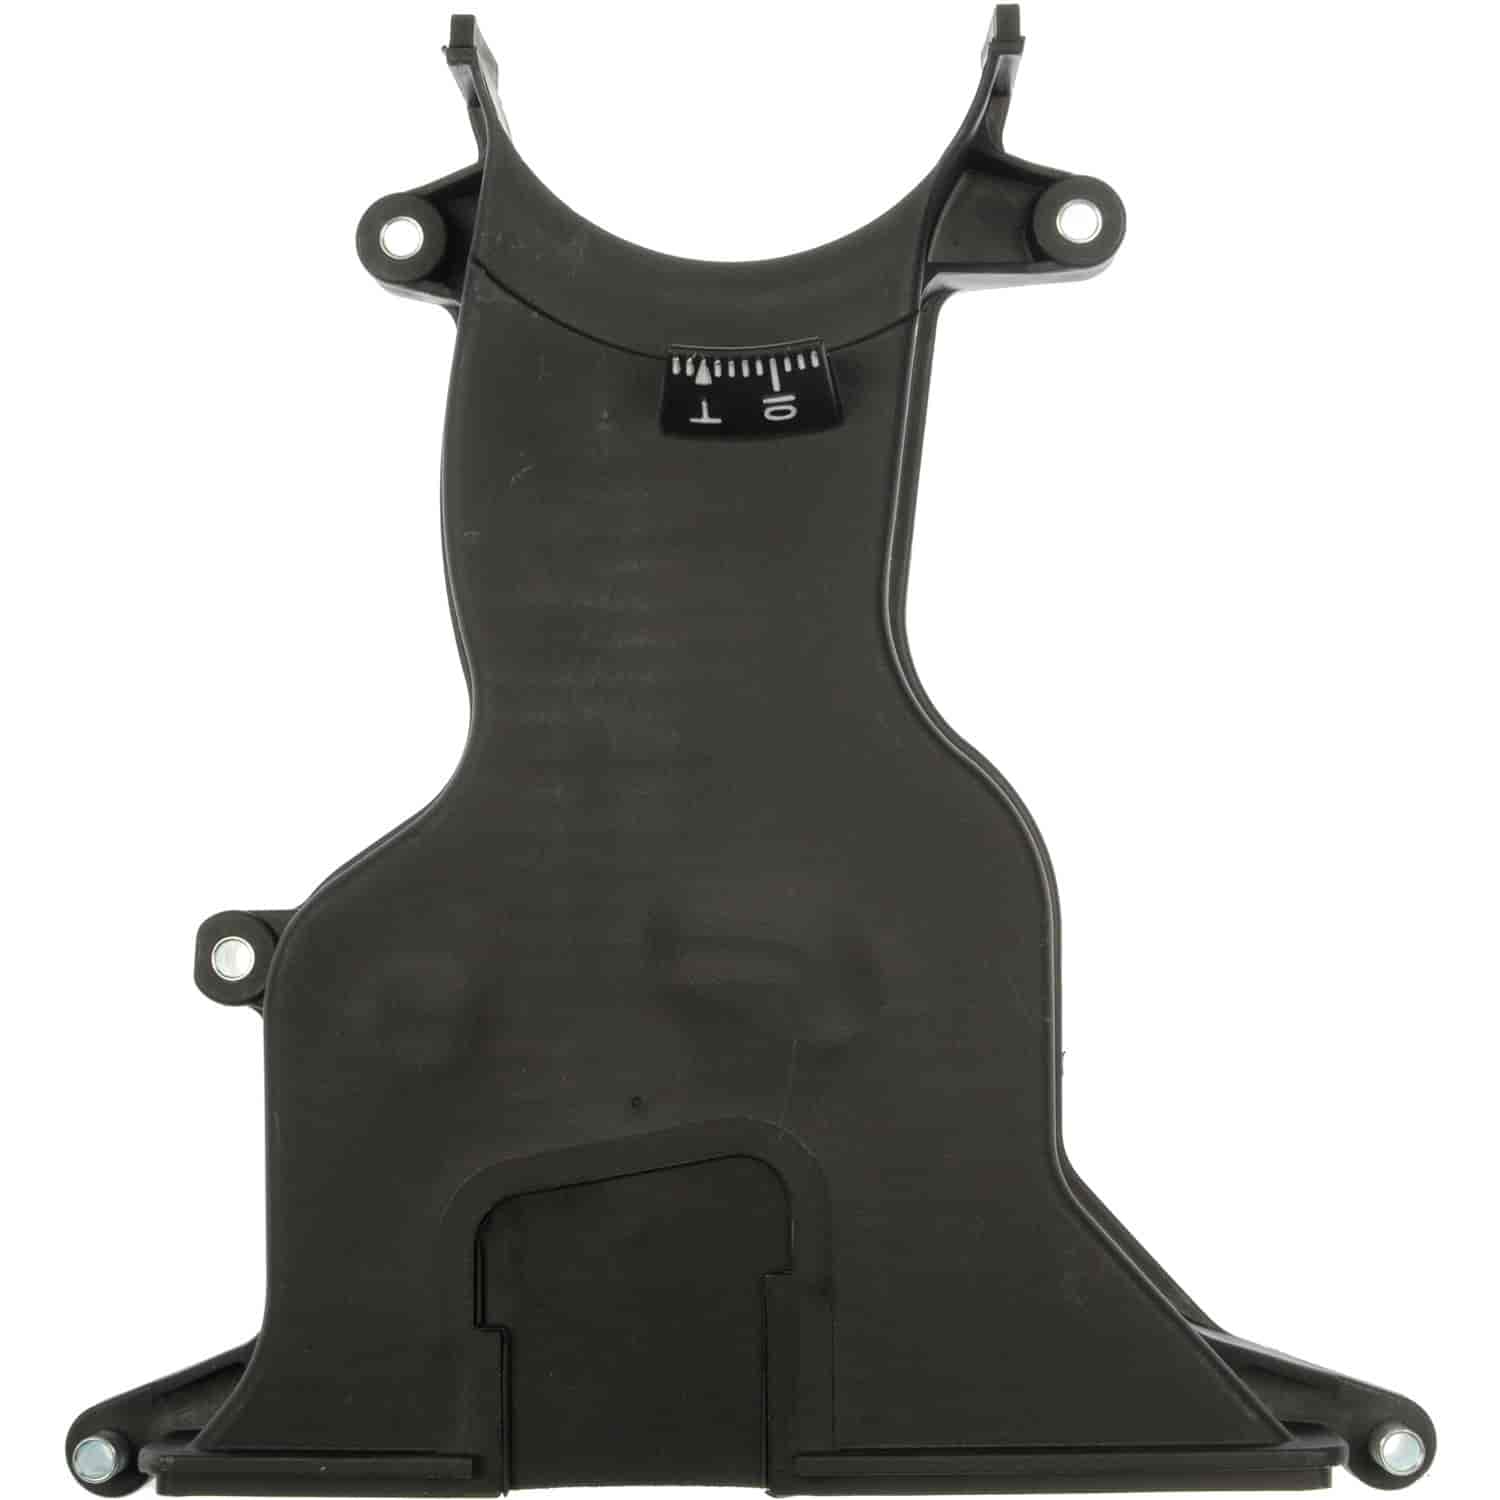 Timing Cover Kit - Includes Gasket